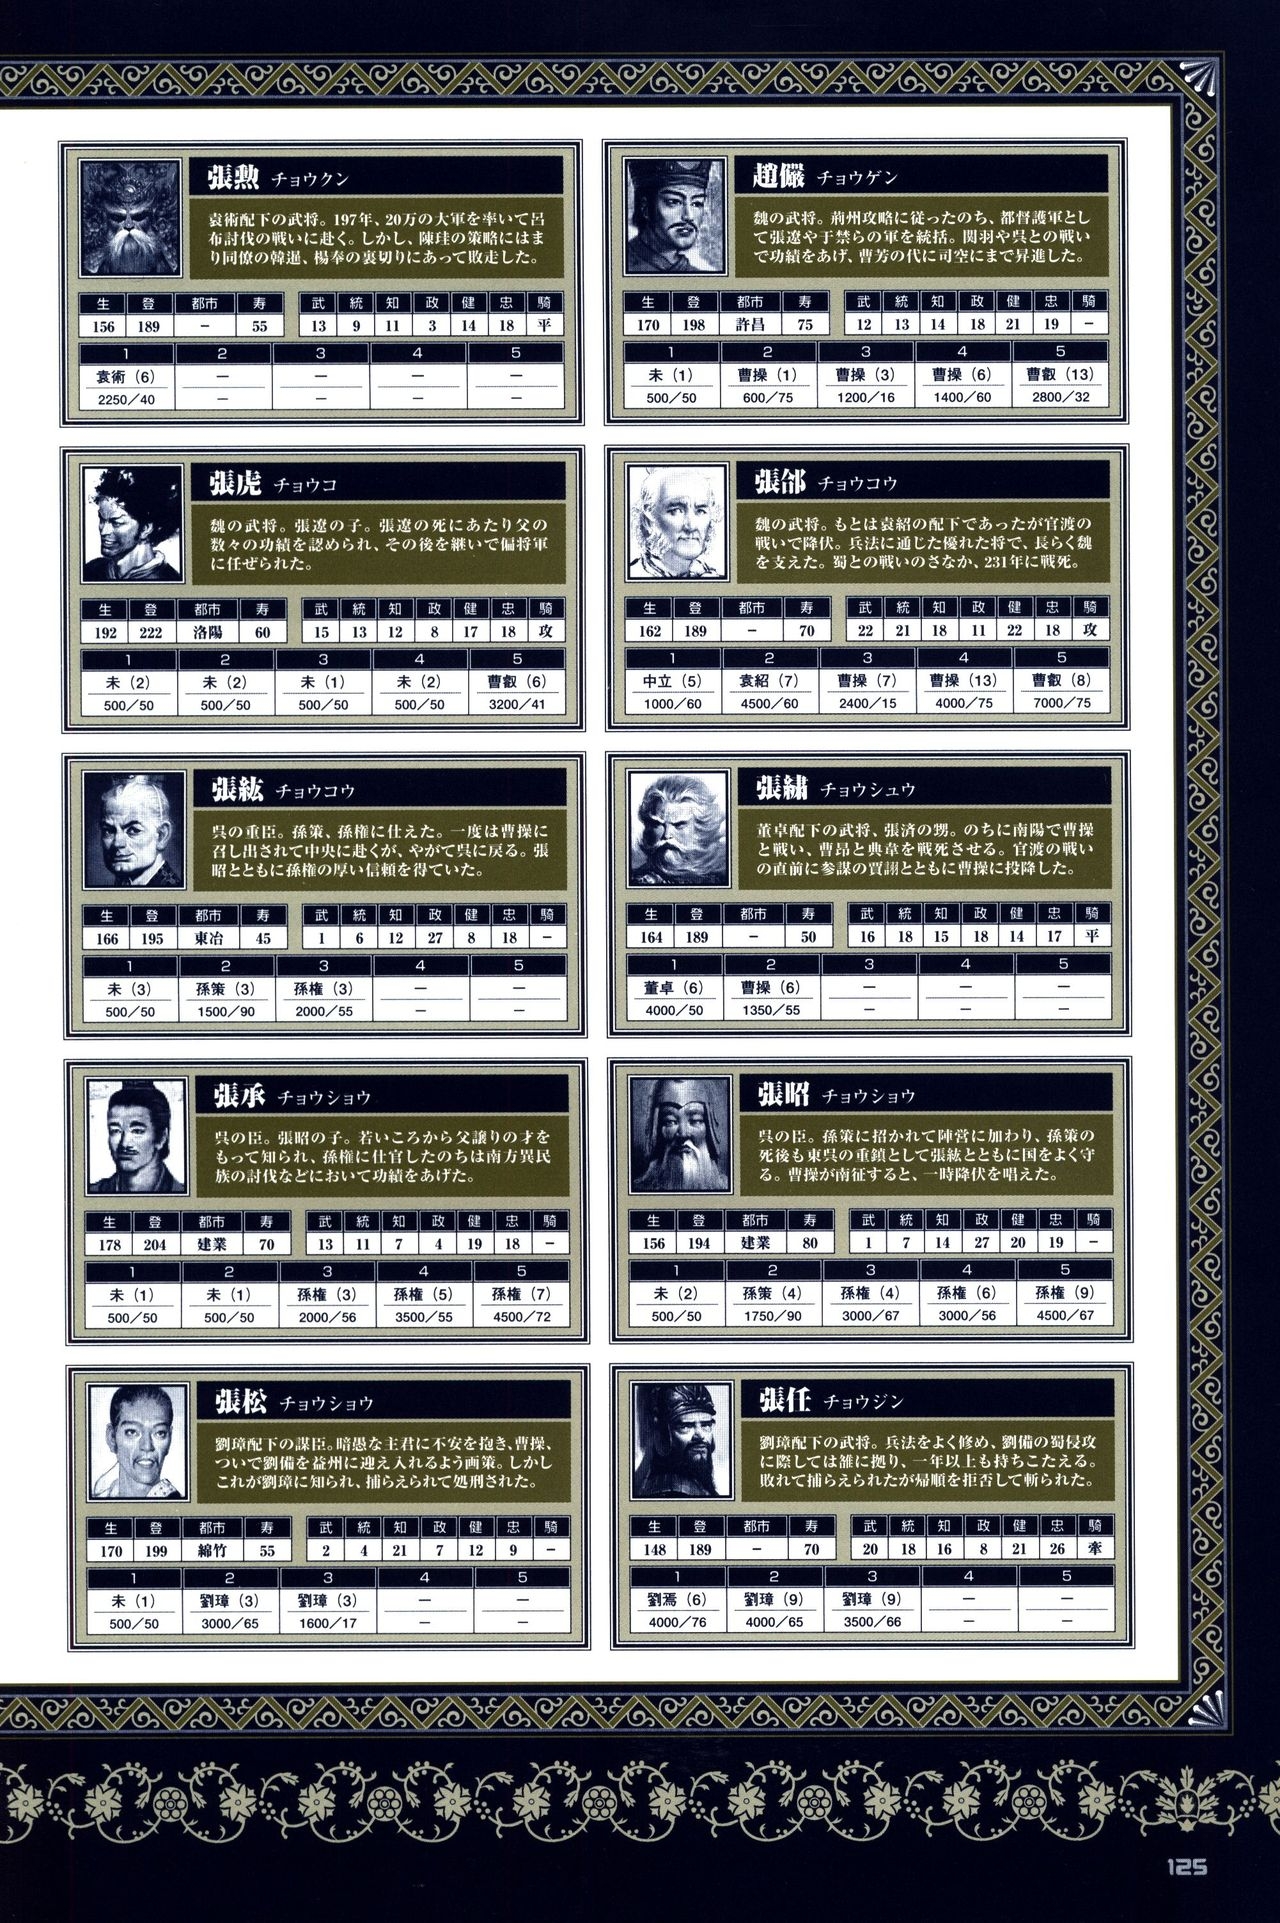 Chen Uen's Three Kingdoms Official Strategy And Illustrations 127